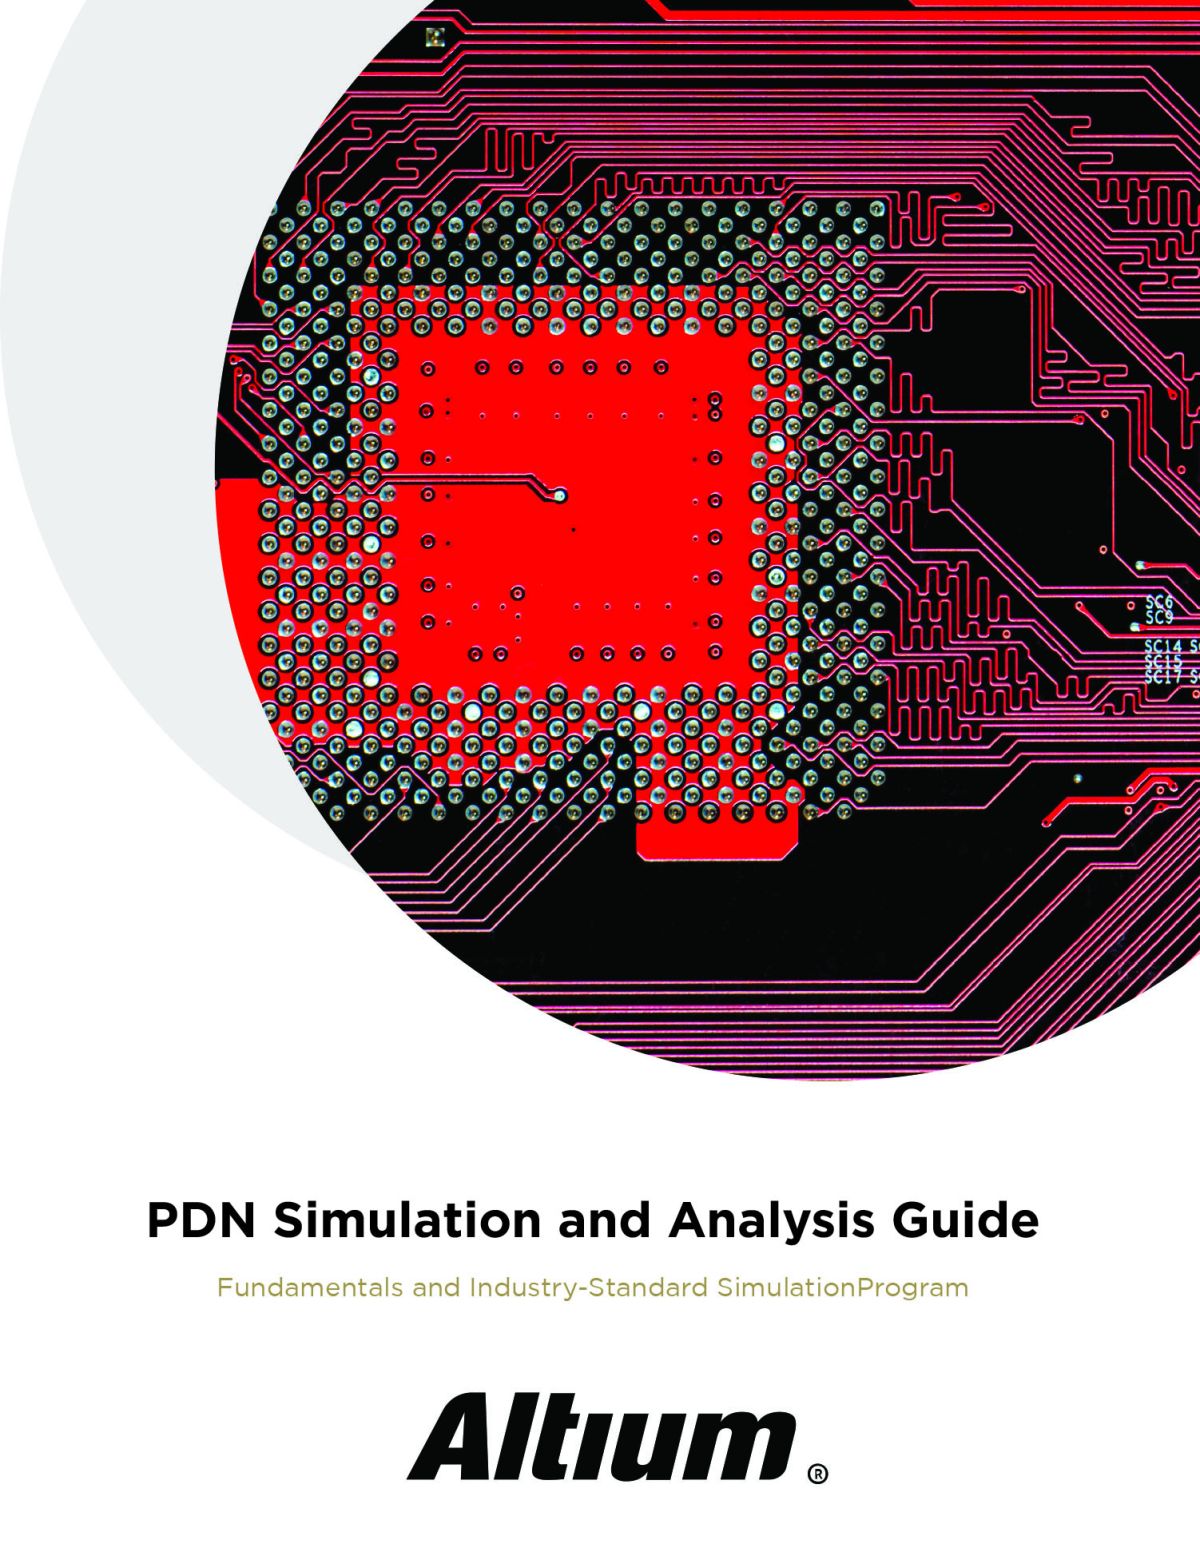 PDN Simulation and Analysis Guide | Free Ebook | Altium